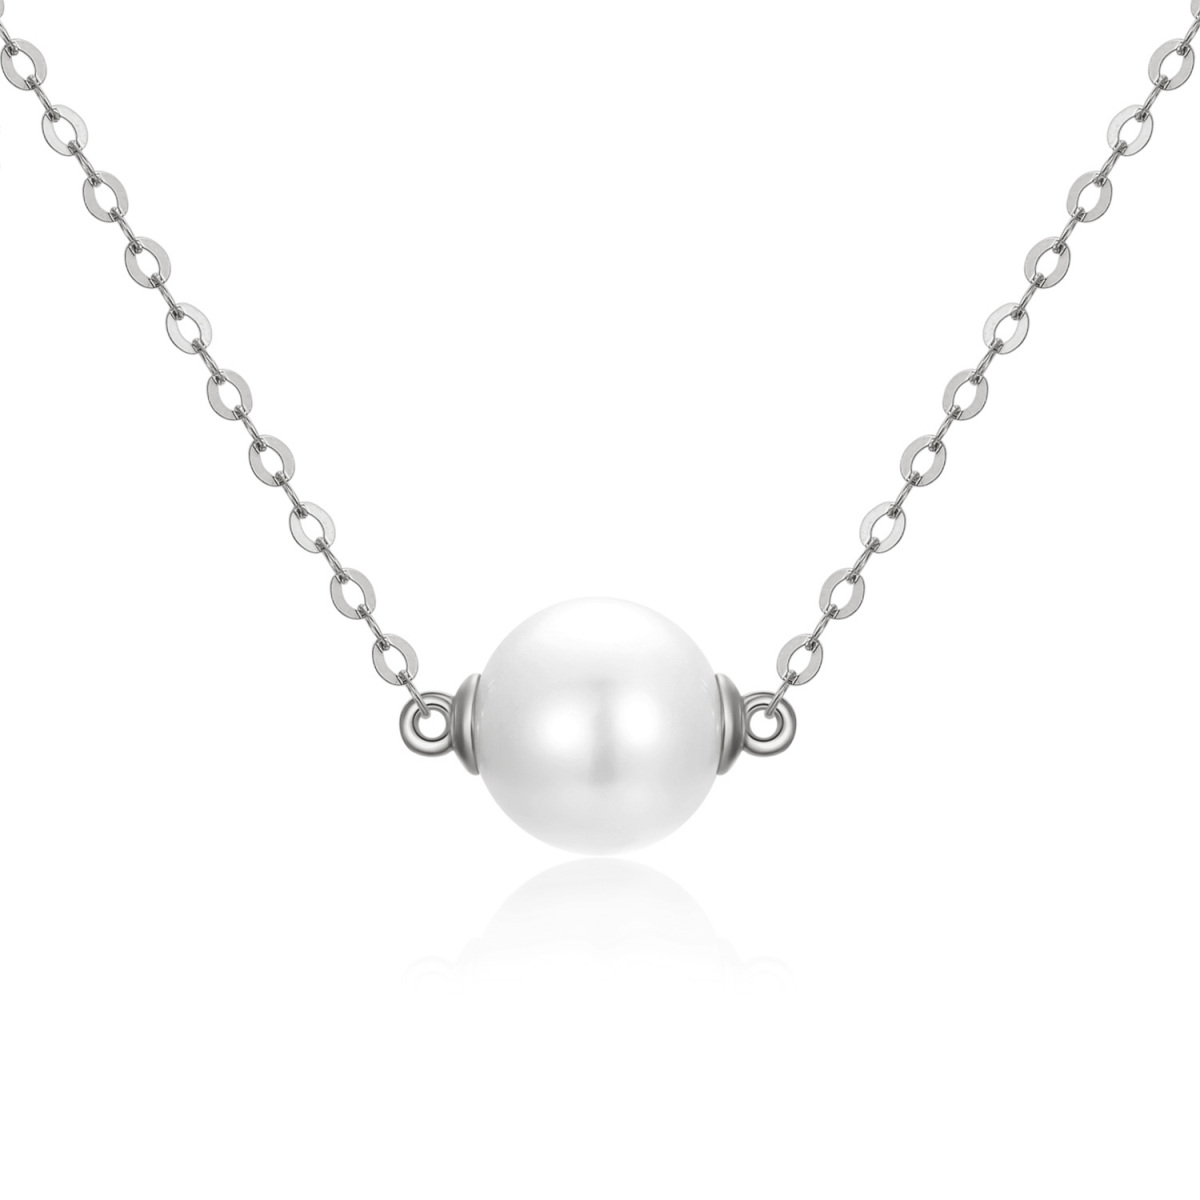 14K White Gold Circular Shaped Pearl Pendant Necklace-1